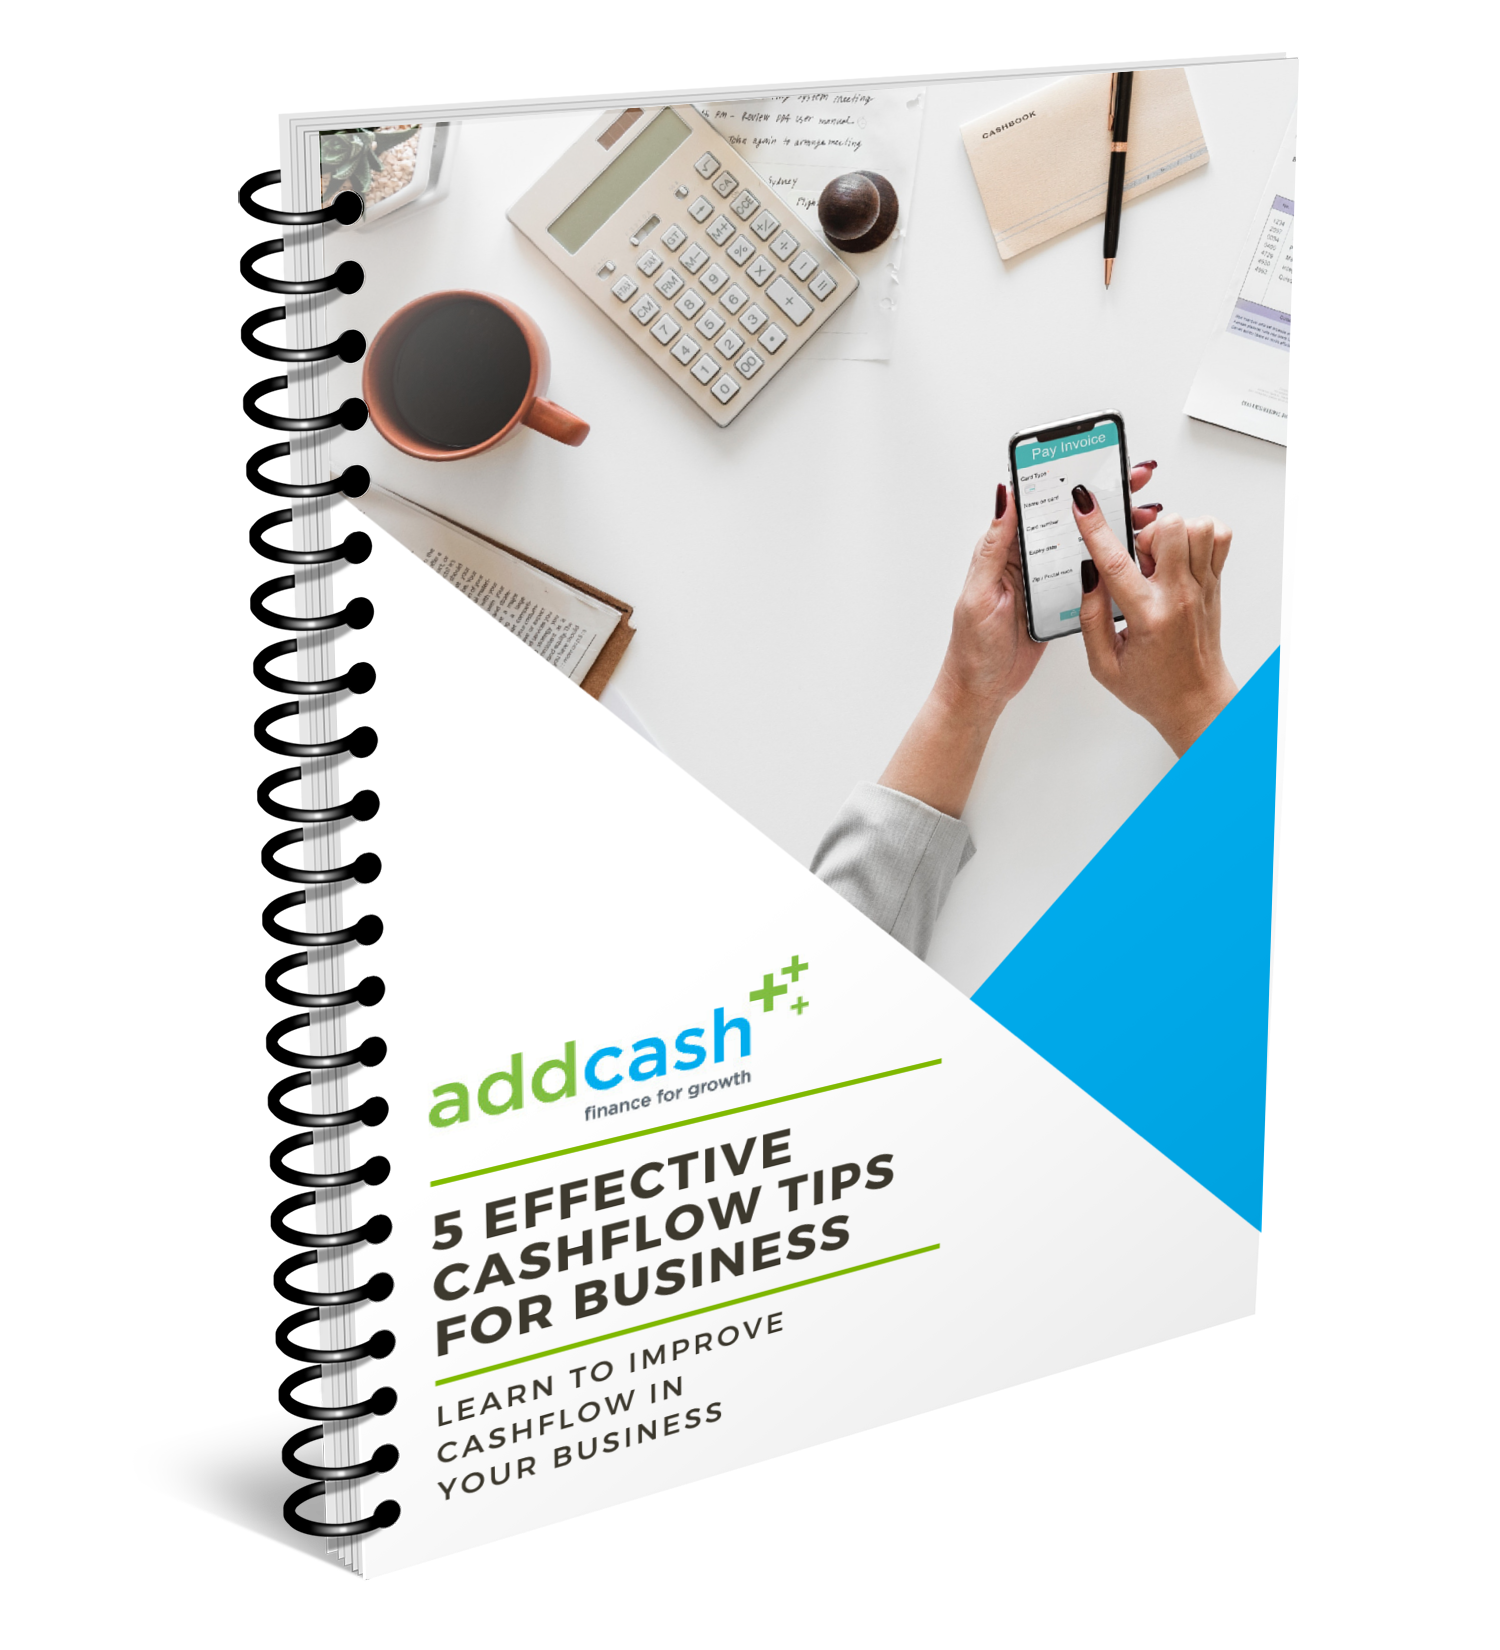 eBook download: The 5 Effective Cashflow Tips for Business